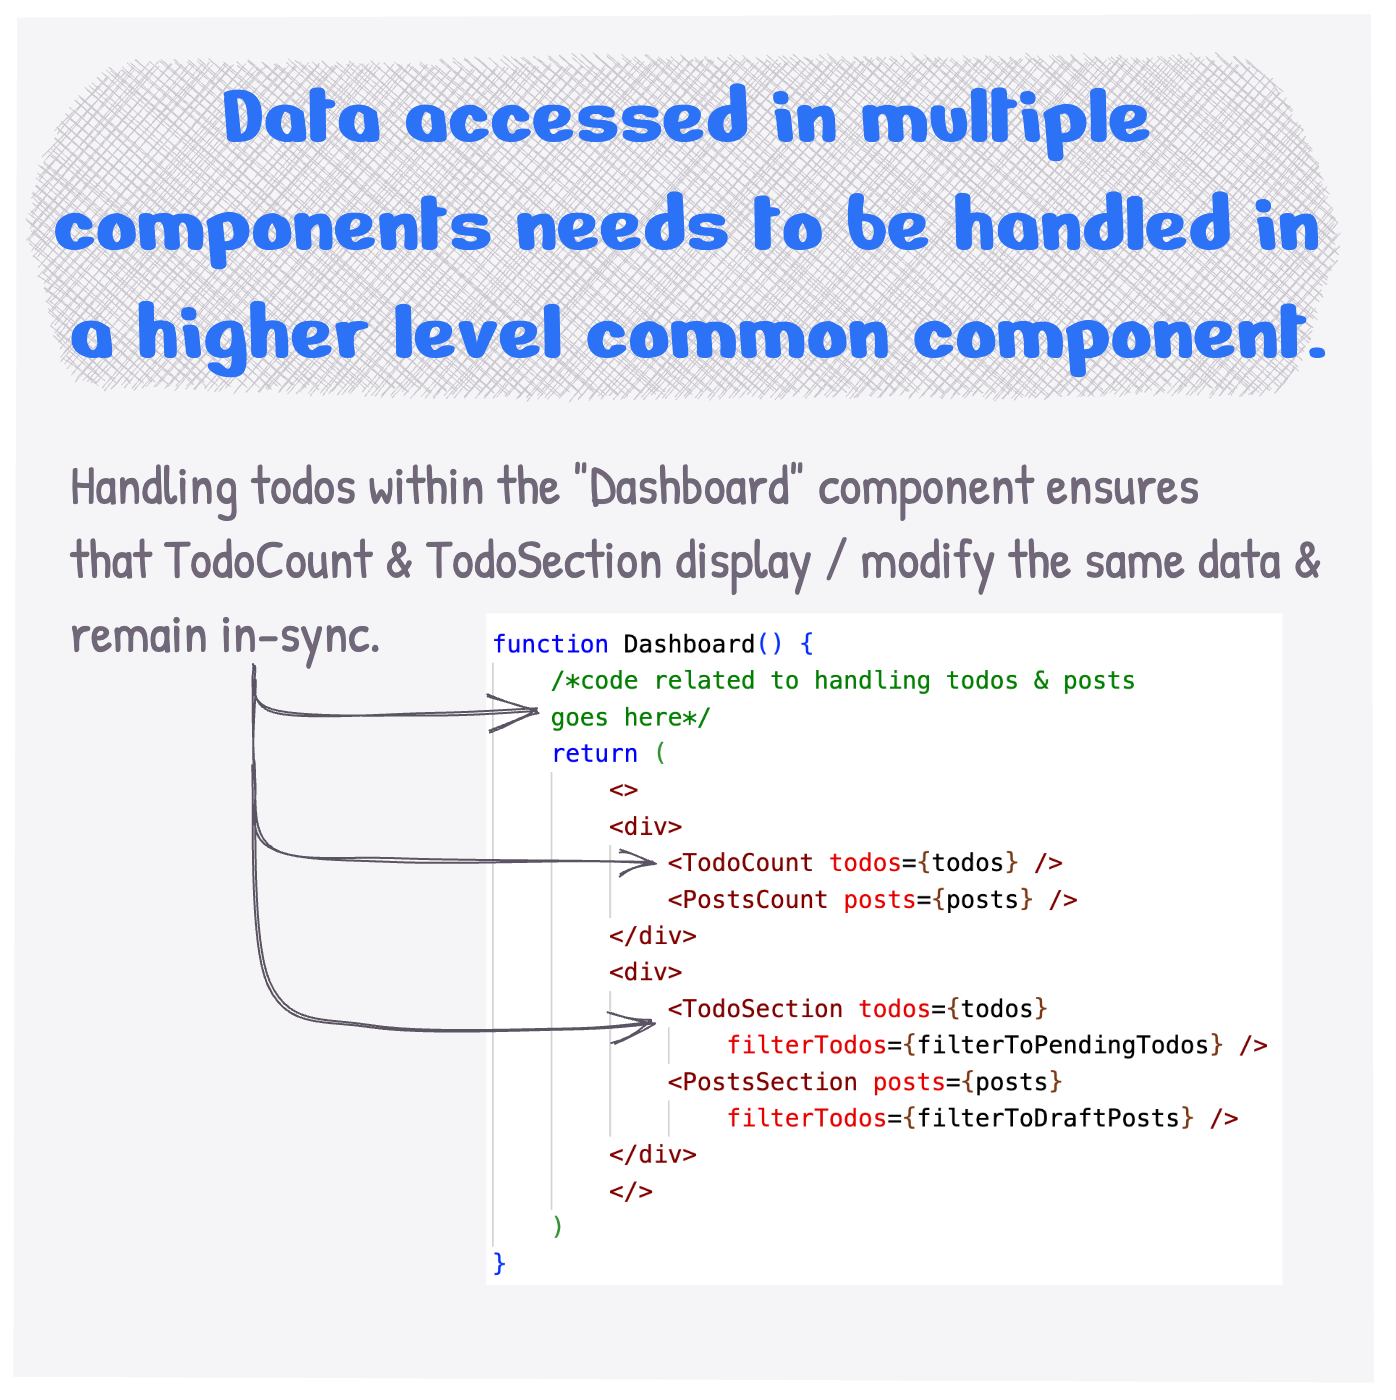 Data accessed in multiple components needs to be handled in a higher level component.